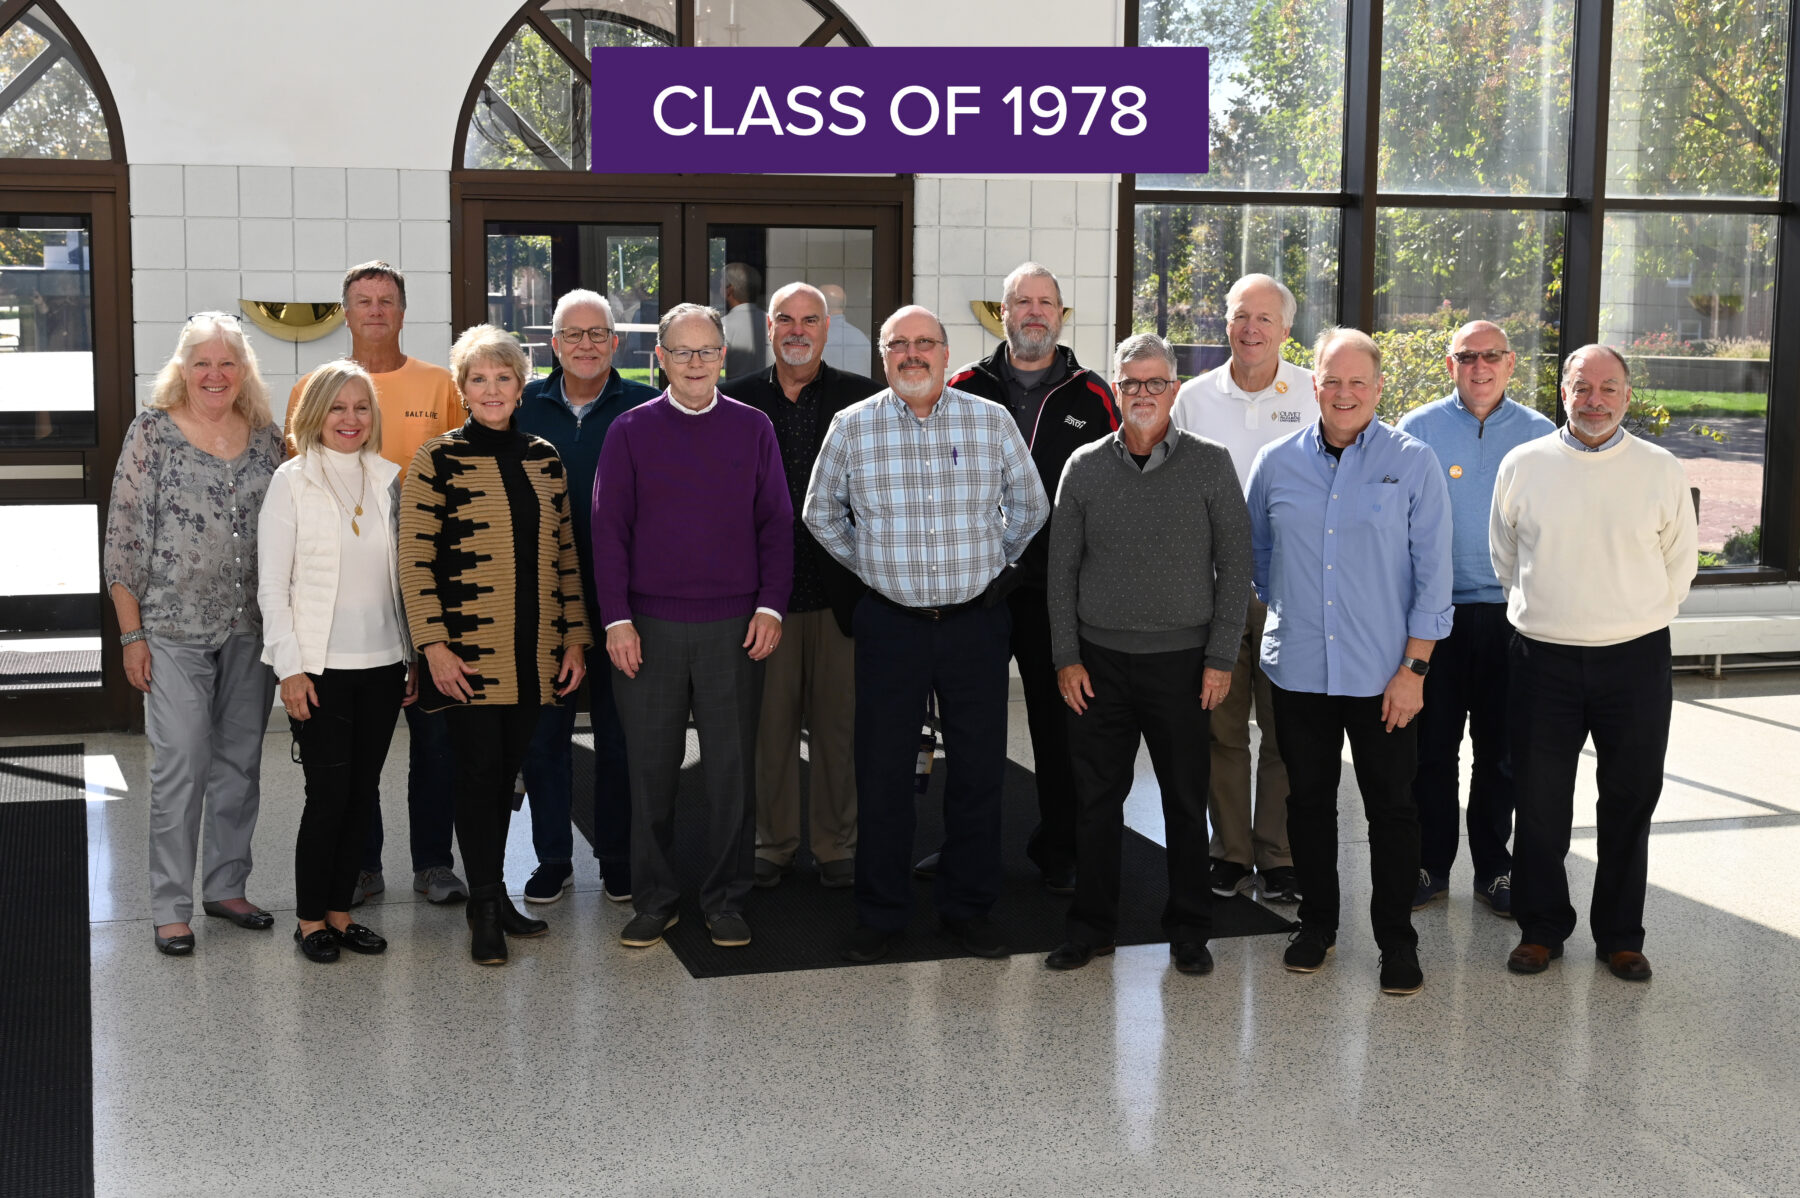 Those who came for the class reunion of 1978 pose for a group photo